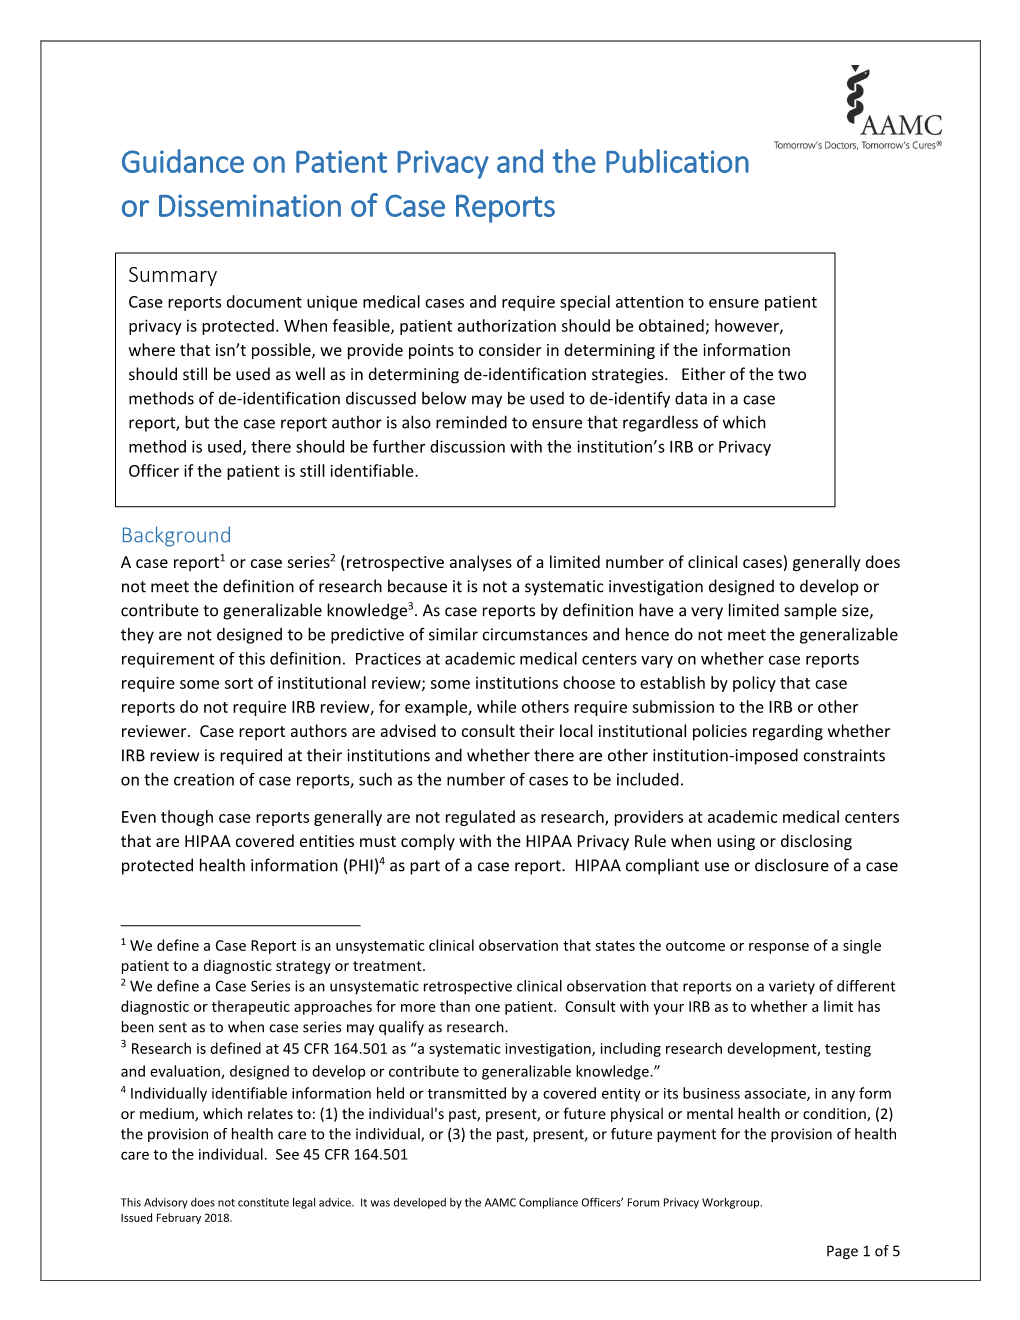 Guidance on Patient Privacy and the Publication Or Dissemination of Case Reports